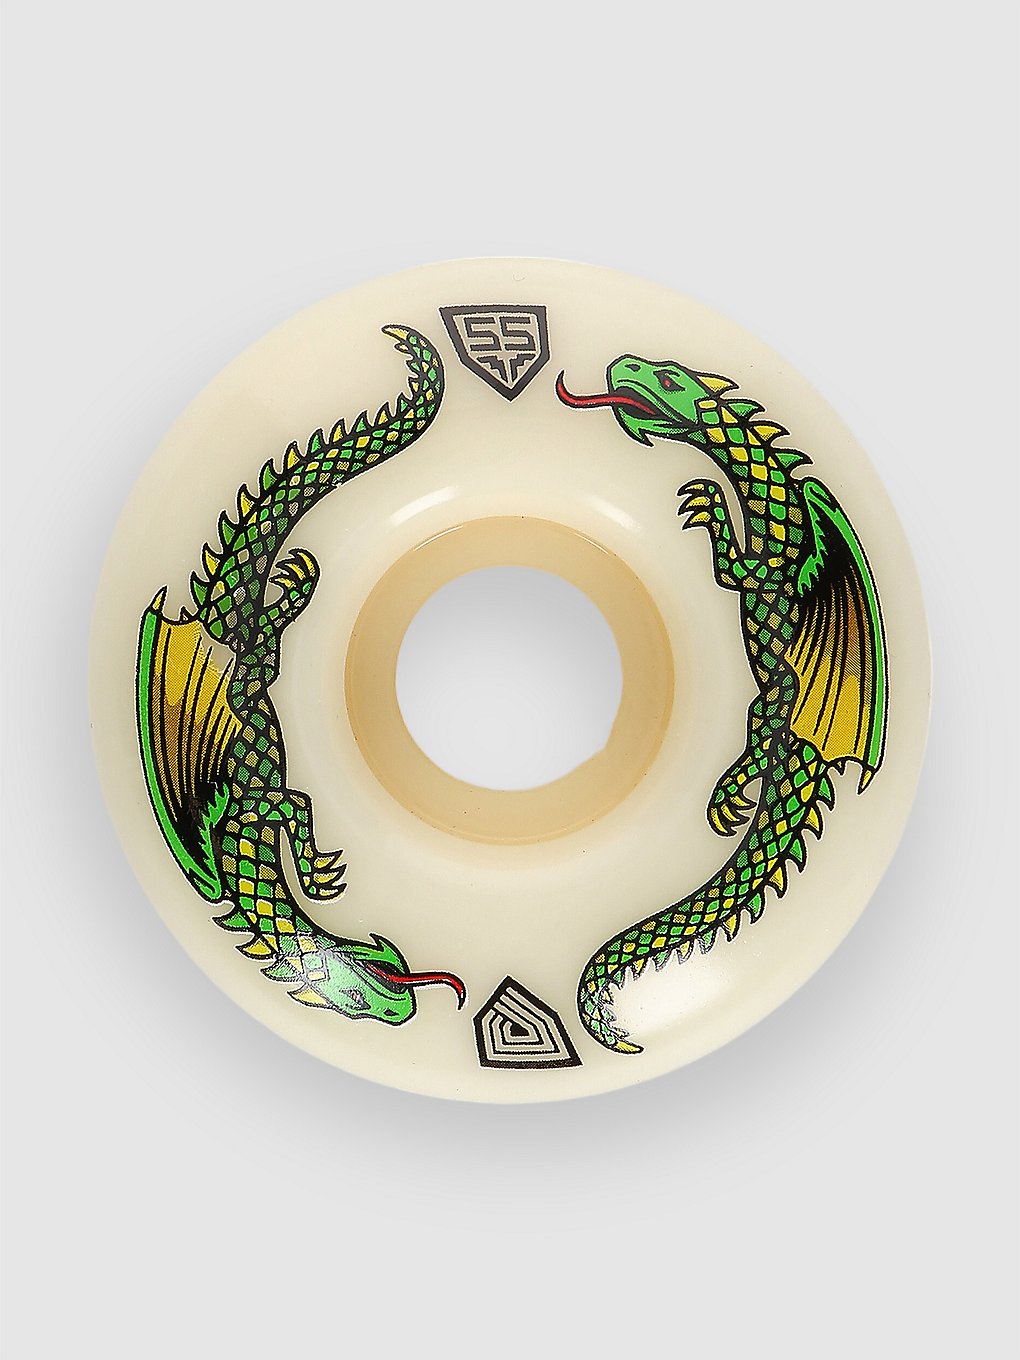 Powell Peralta Dragons 93A V4 Wide 55mm Rollen offwhite kaufen